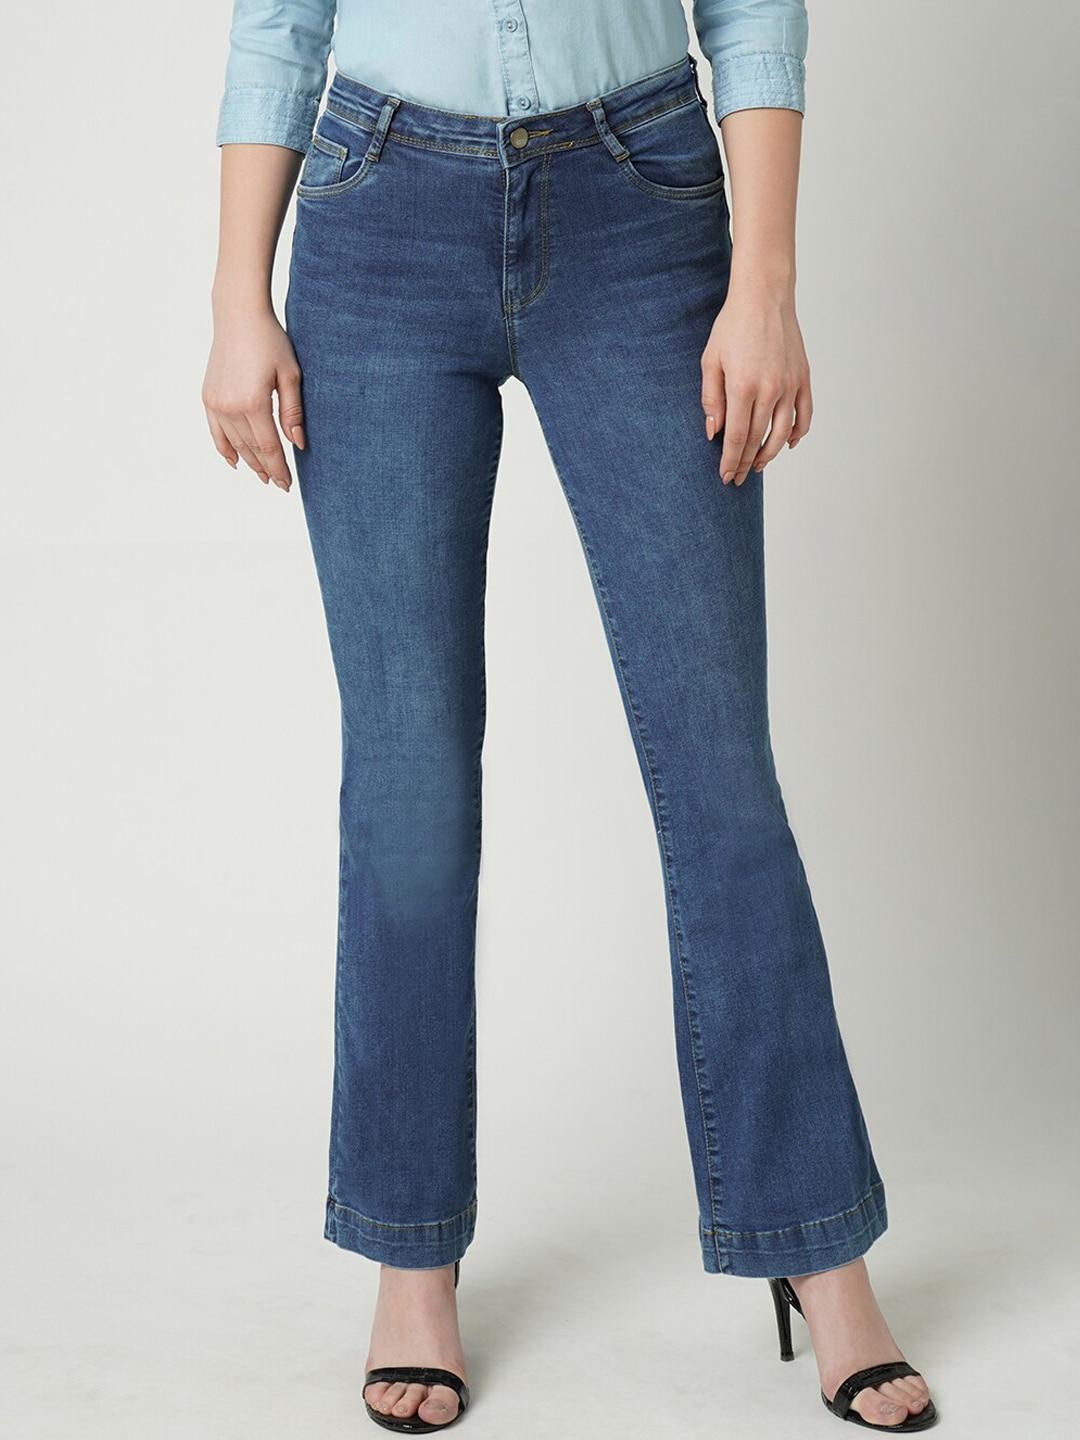 kraus-jeans-women-flared-high-rise-light-fade-jeans